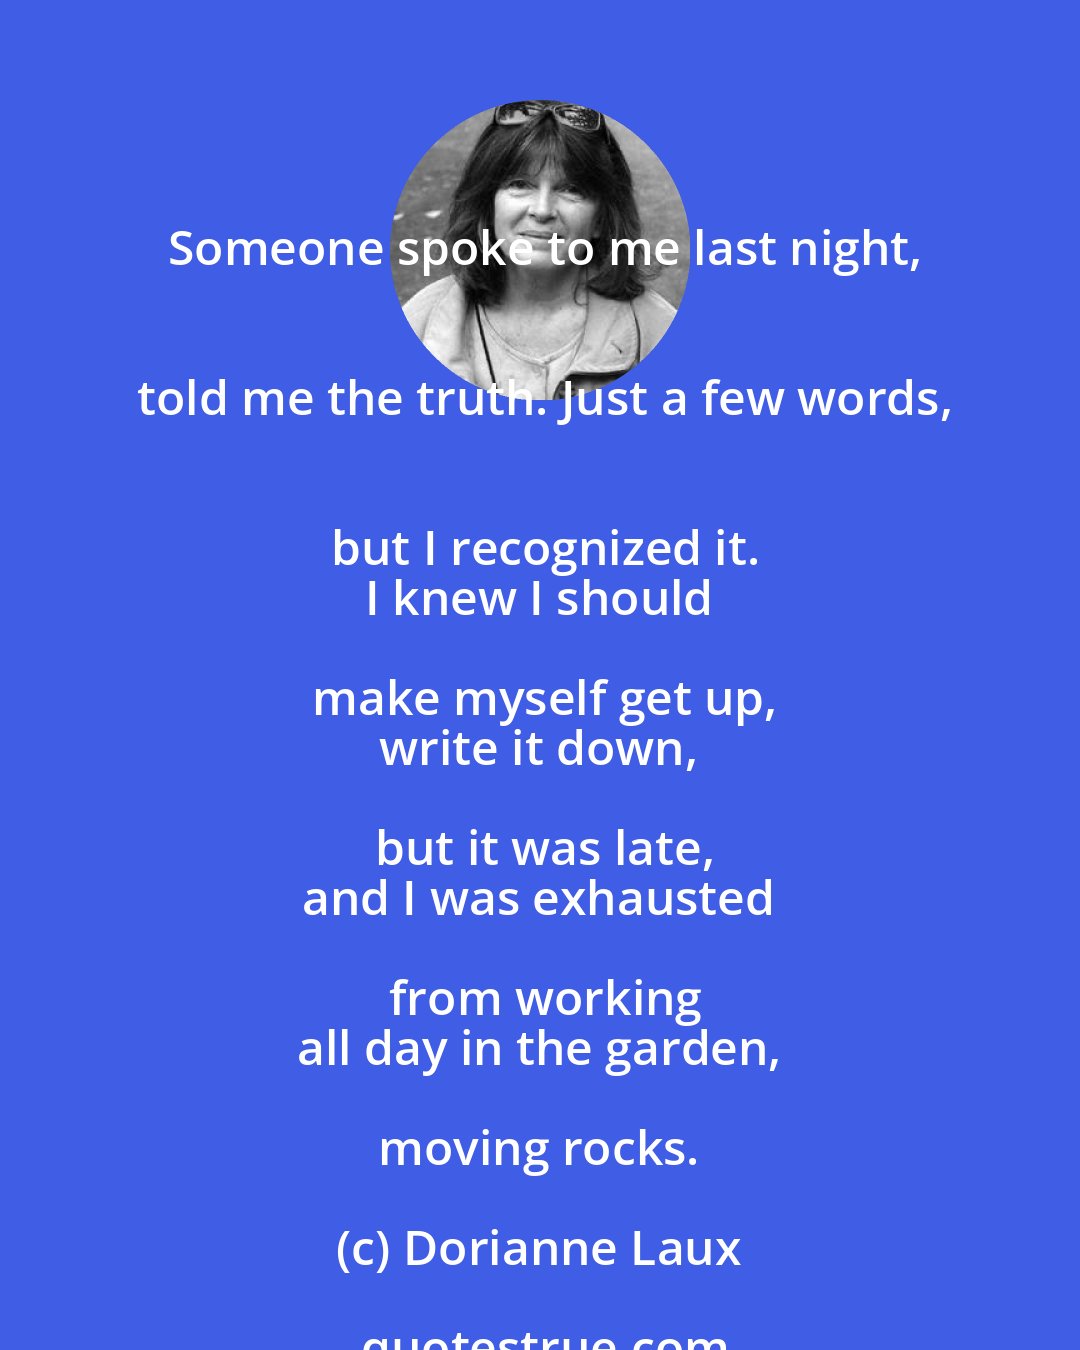 Dorianne Laux: Someone spoke to me last night,
 told me the truth. Just a few words,
 but I recognized it.
 I knew I should make myself get up,
 write it down, but it was late,
 and I was exhausted from working
 all day in the garden, moving rocks.